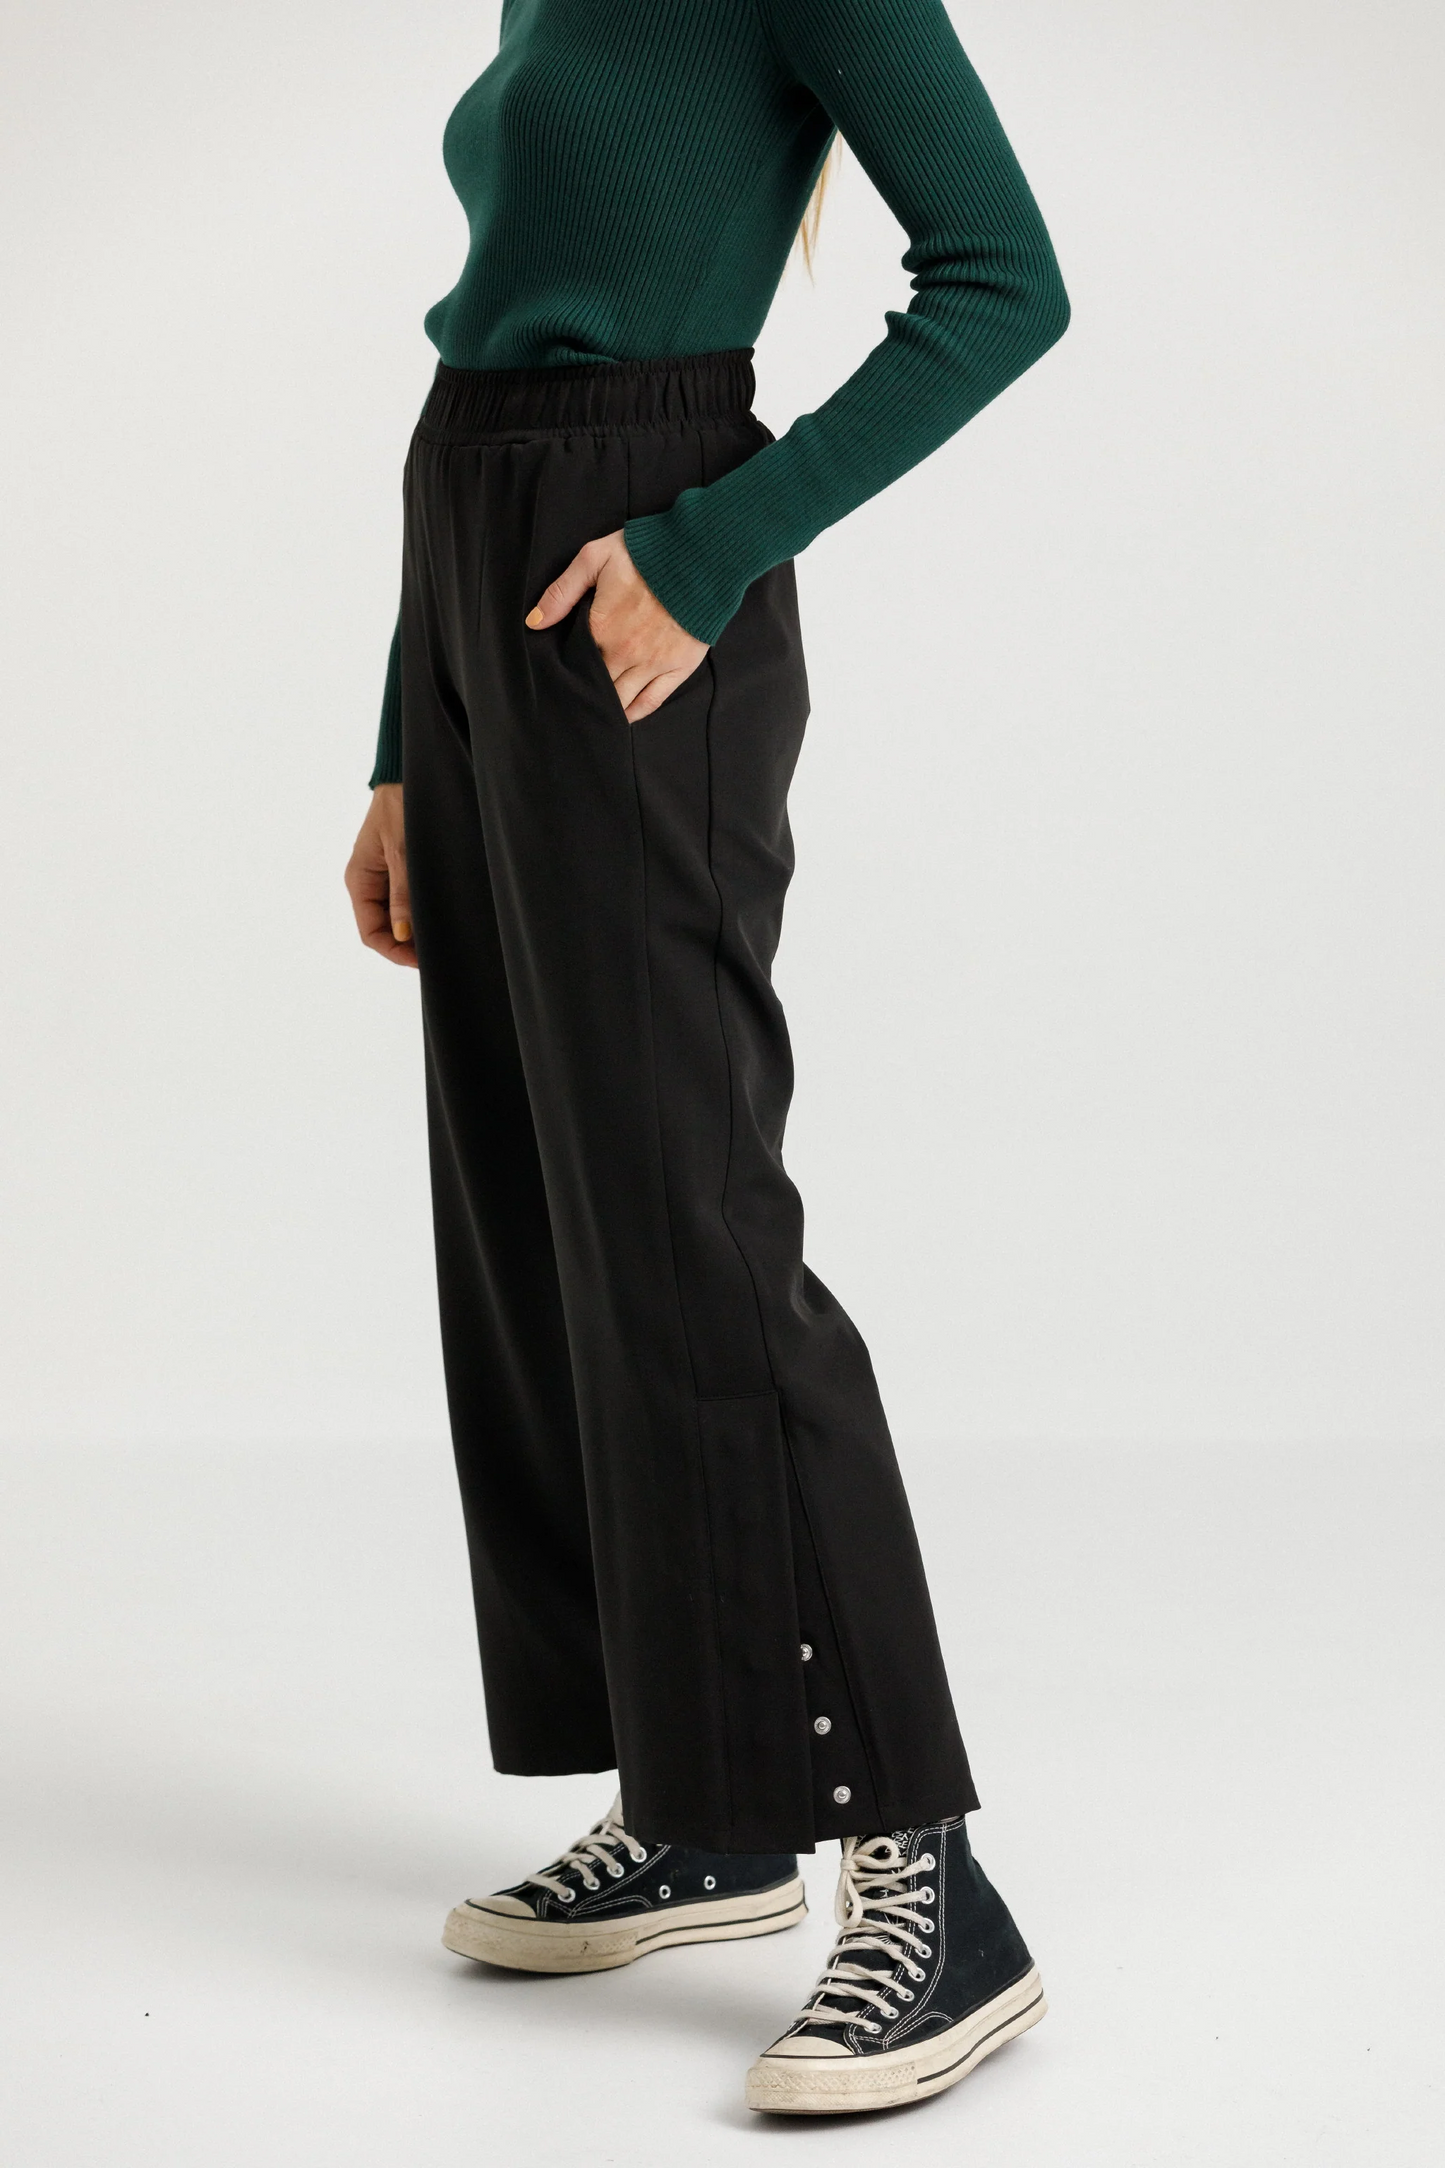 THING THING SNAPPIE PANT - BLACK - THE VOGUE STORE